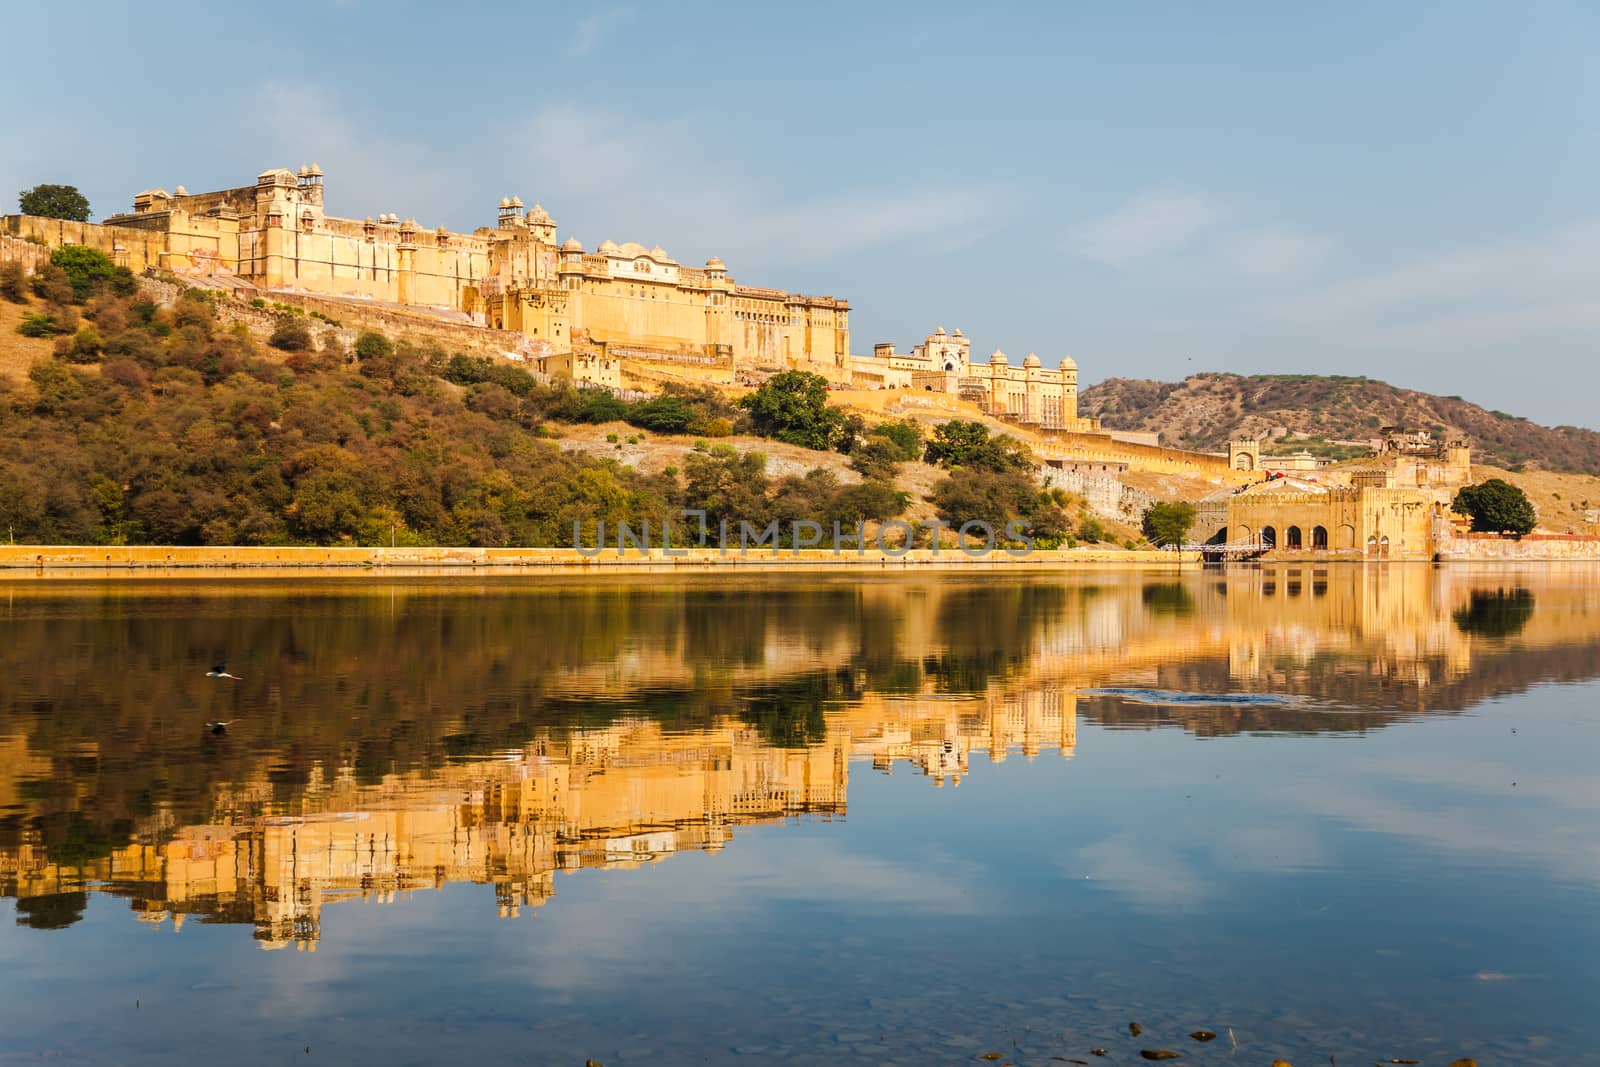 Amber Fort and the reflection by takepicsforfun